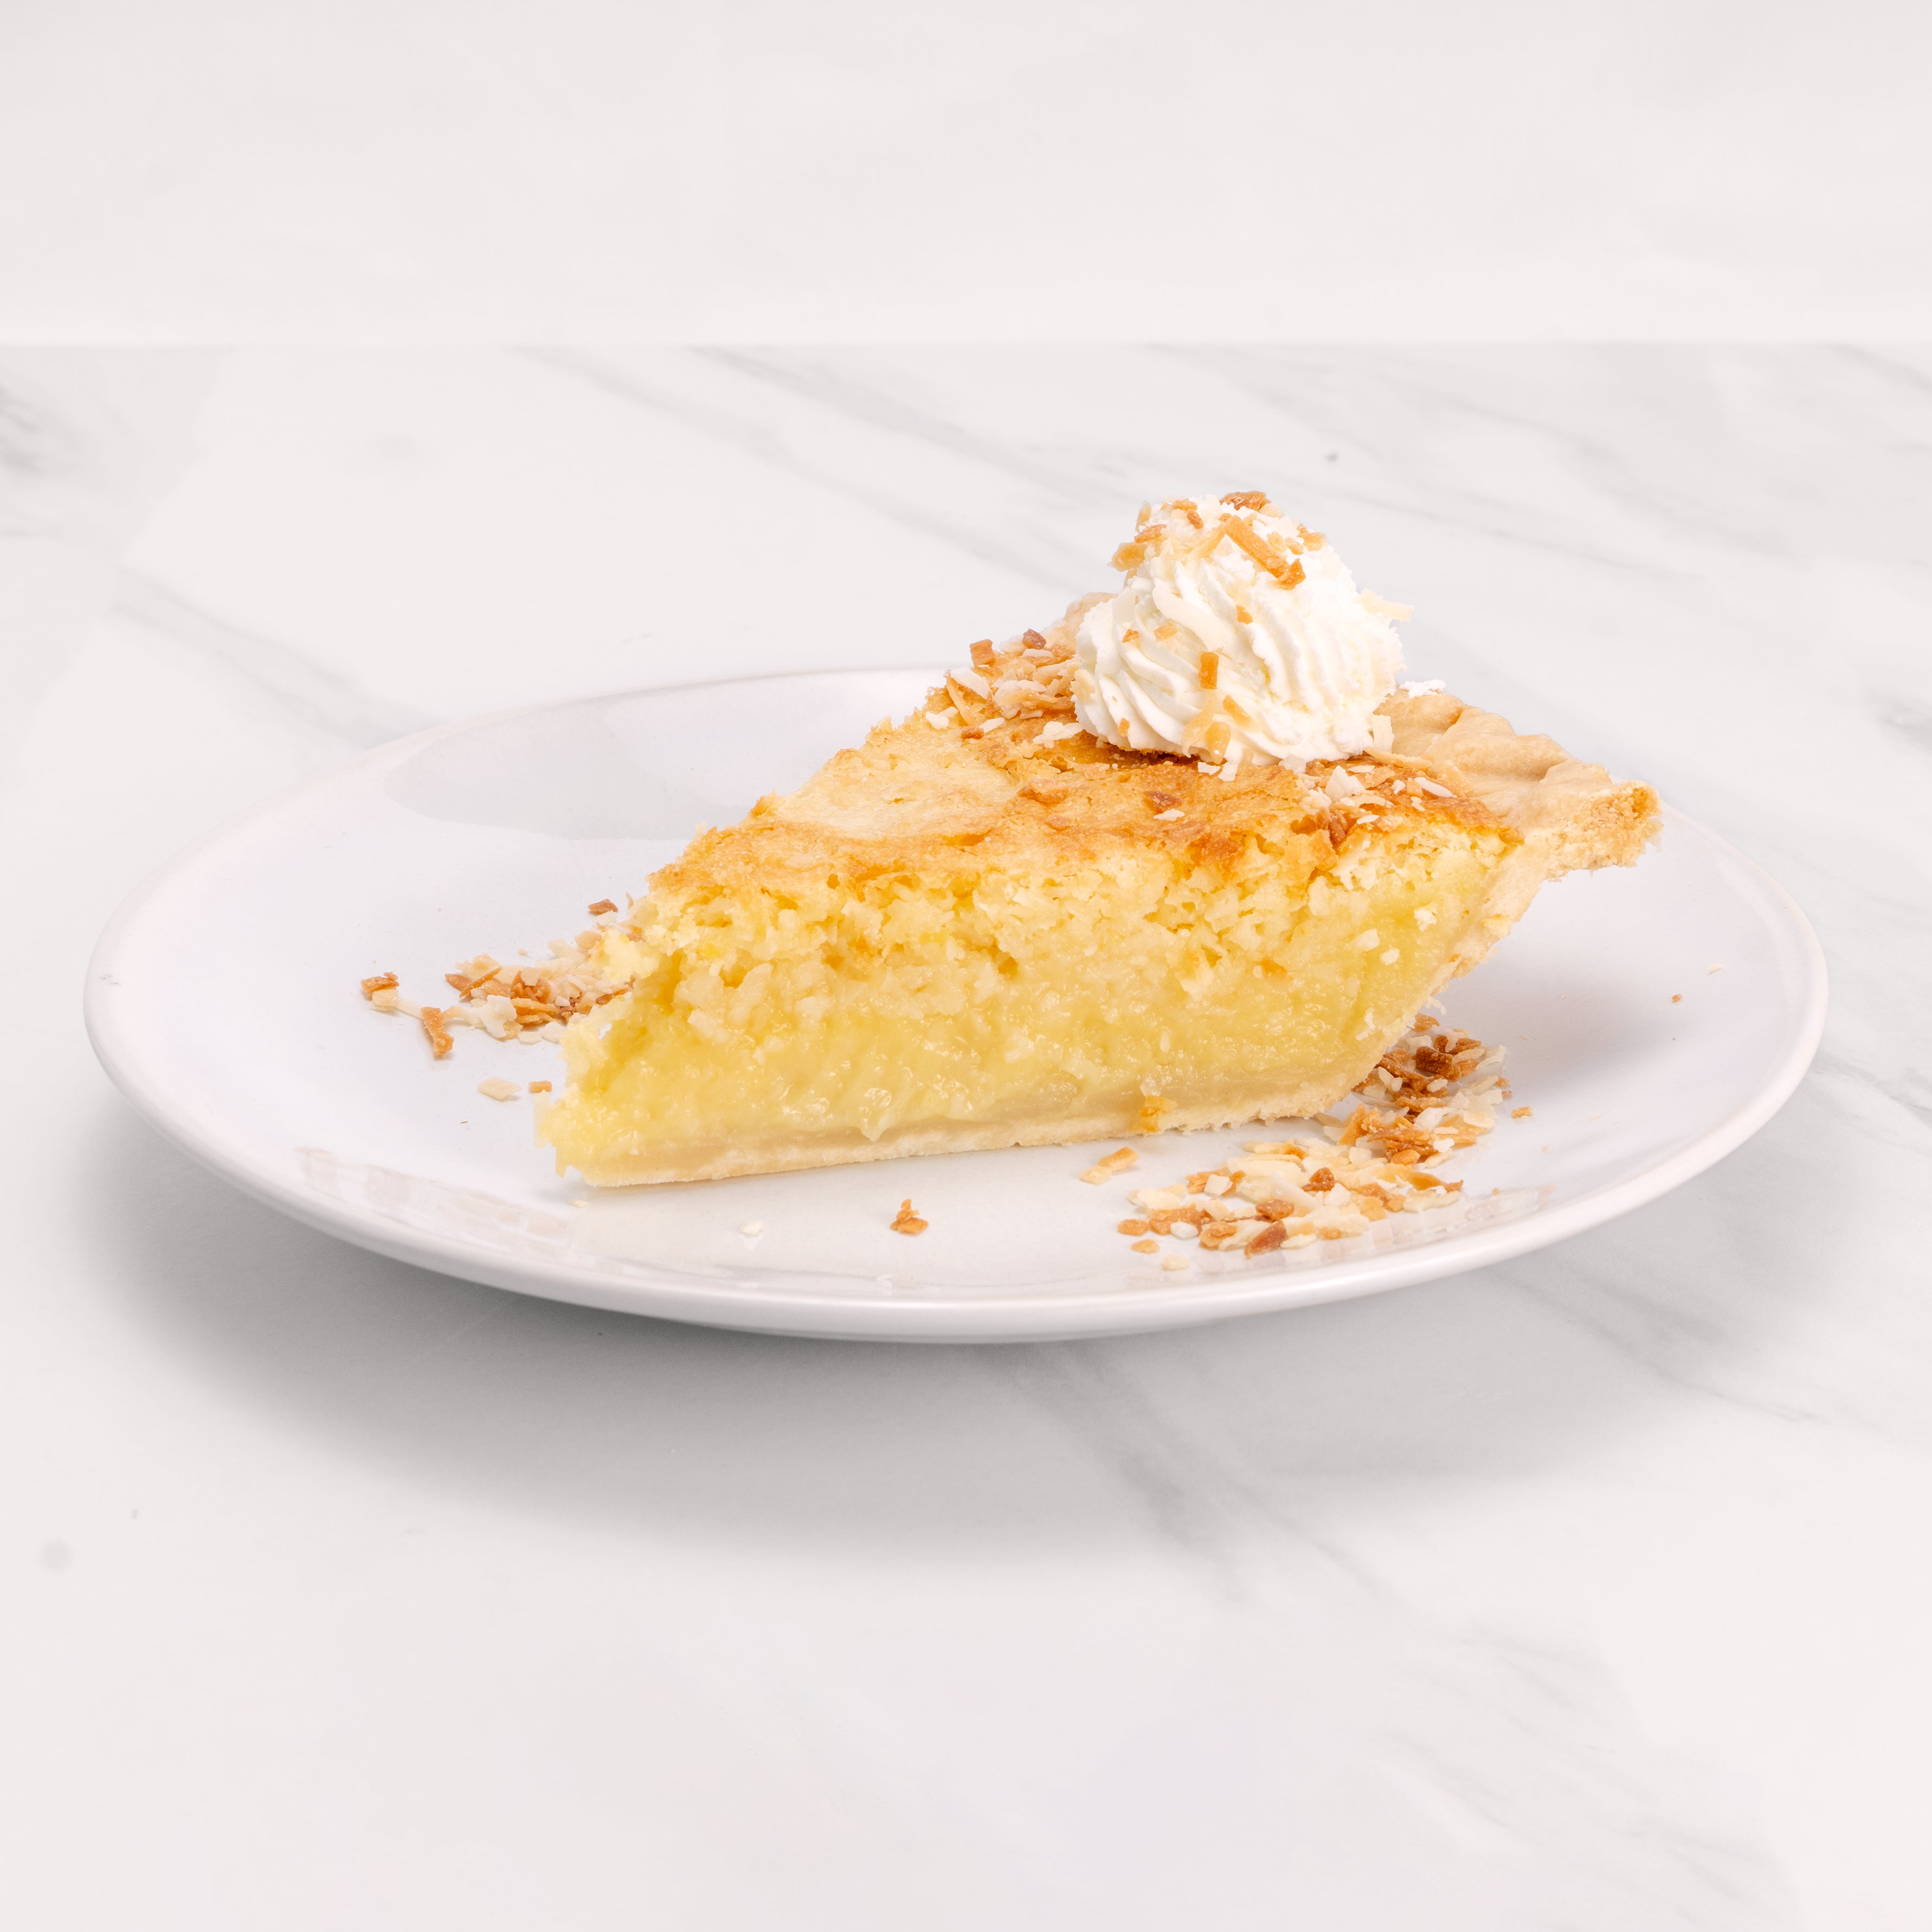 Slice of Coconut Supreme pie garnished with a dollop of crème on top and toasted coconut flakes.